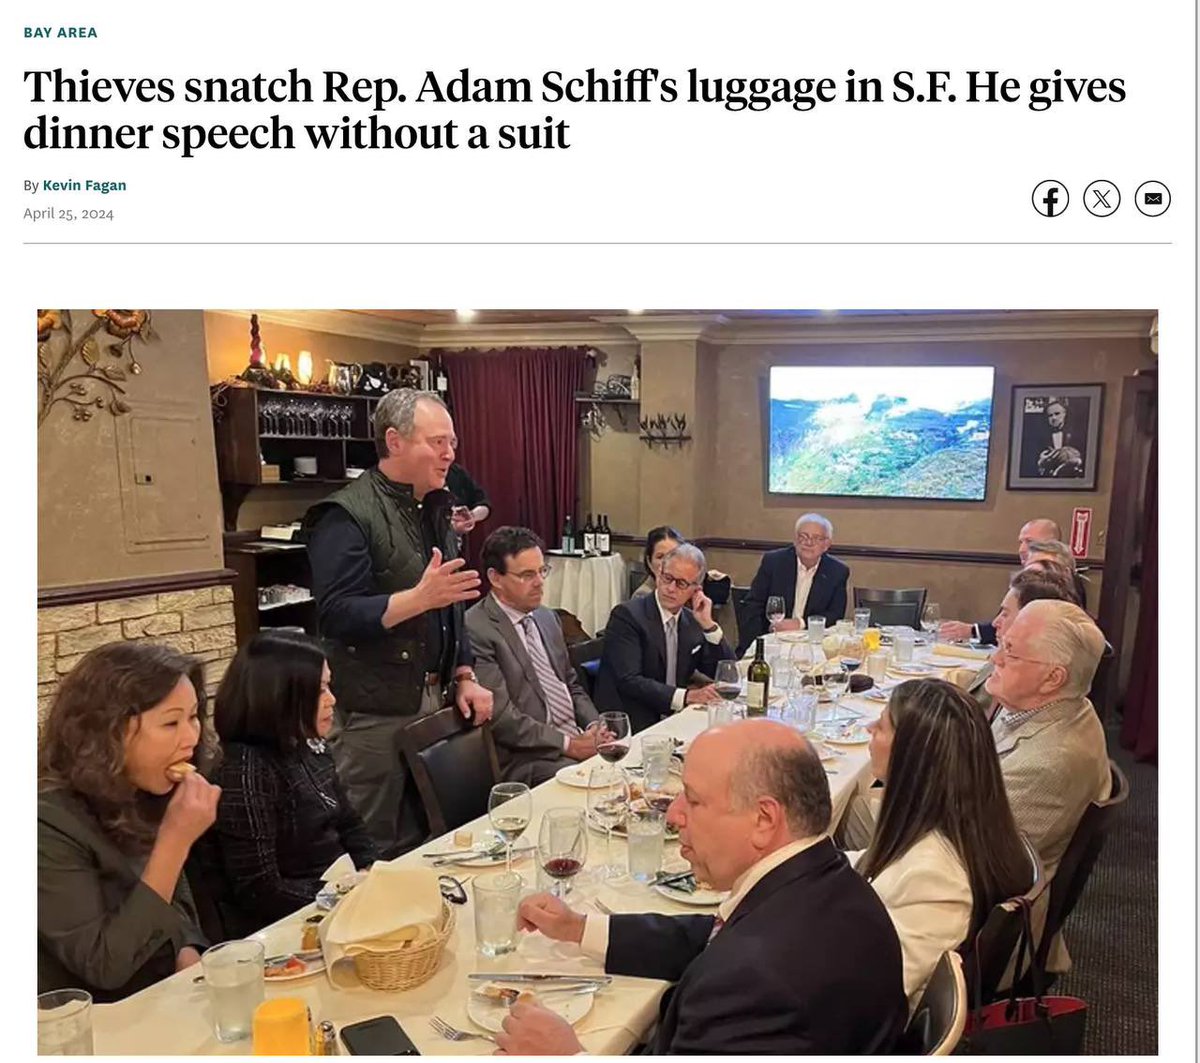 Adam Schiff’s luggage was stolen in San Francisco, forcing him to show up to a meeting with no suit.